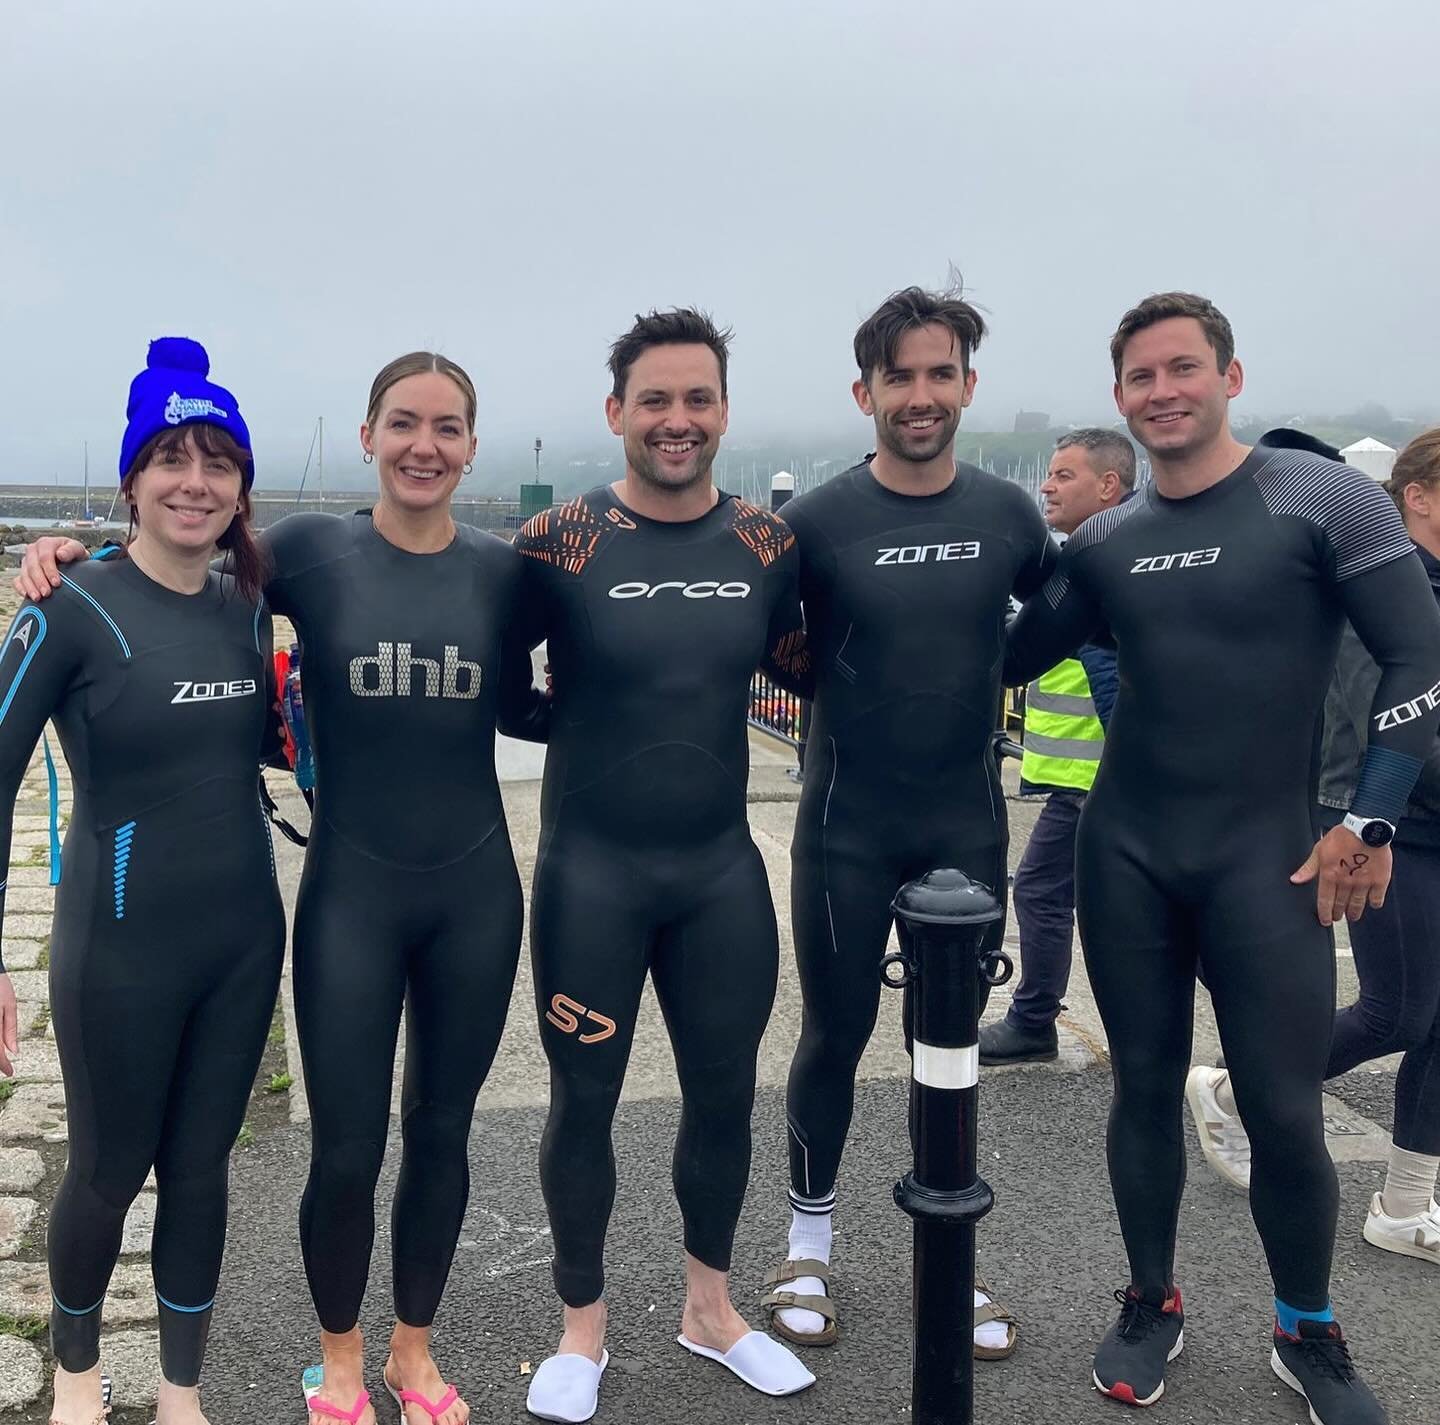 Join us for a dip? Escape From Irelands Eye takes place Sunday June 23rd. 

Interested in getting involved with us. We offer premium coaching but also free access to our community. 

We do better together

Check the links in our bio @elementhfp
DM us